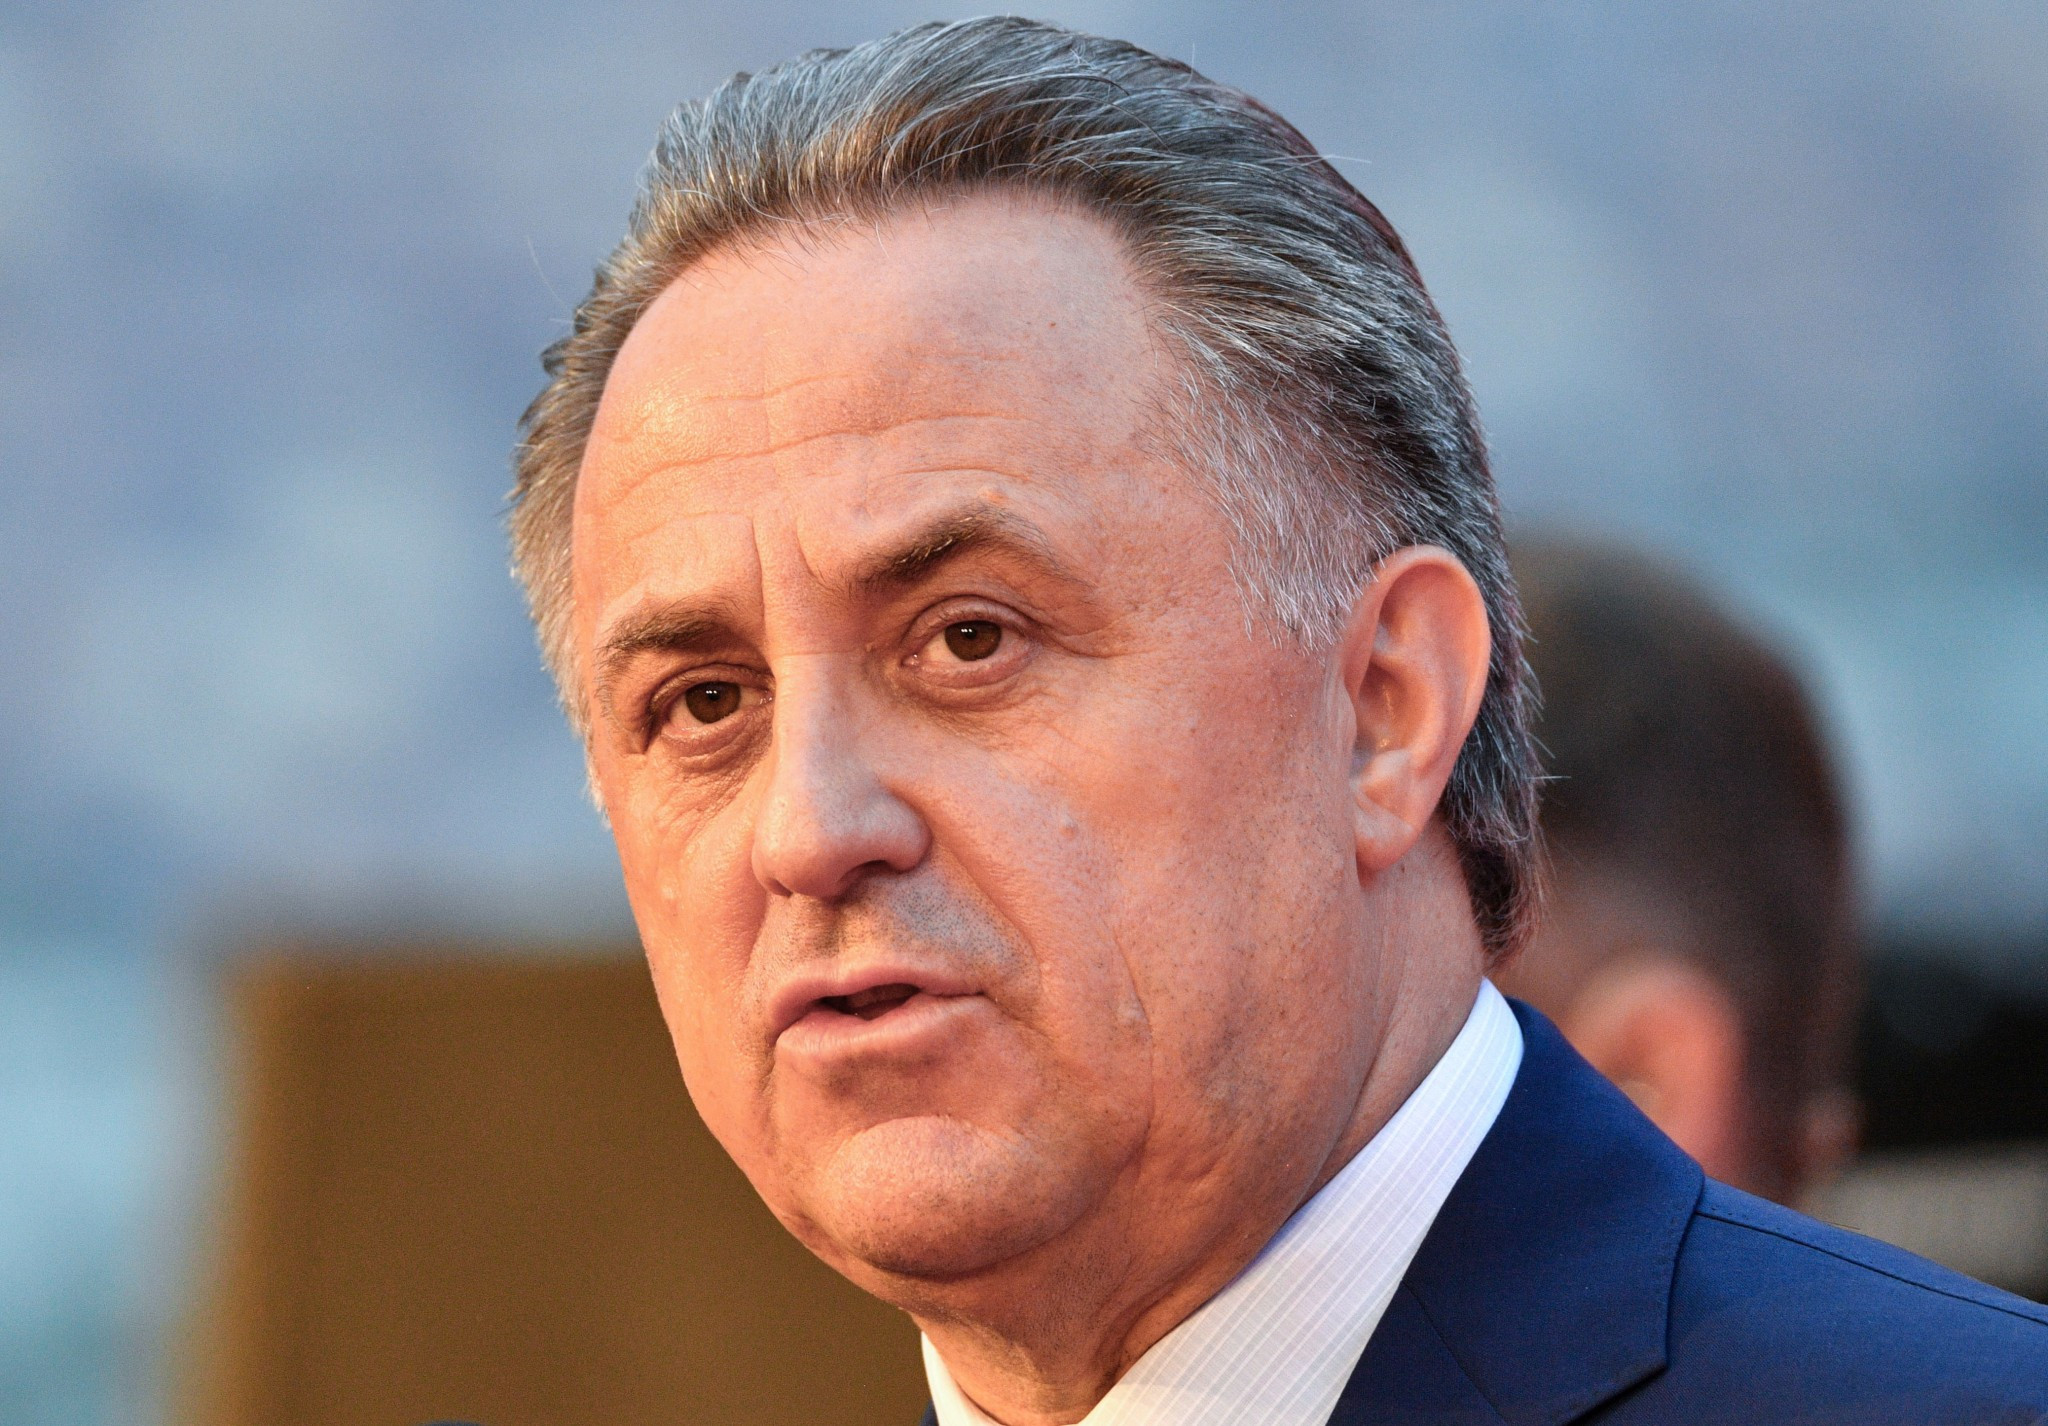 Mutko claims most issues blocking RUSADA's reinstatement have been resolved